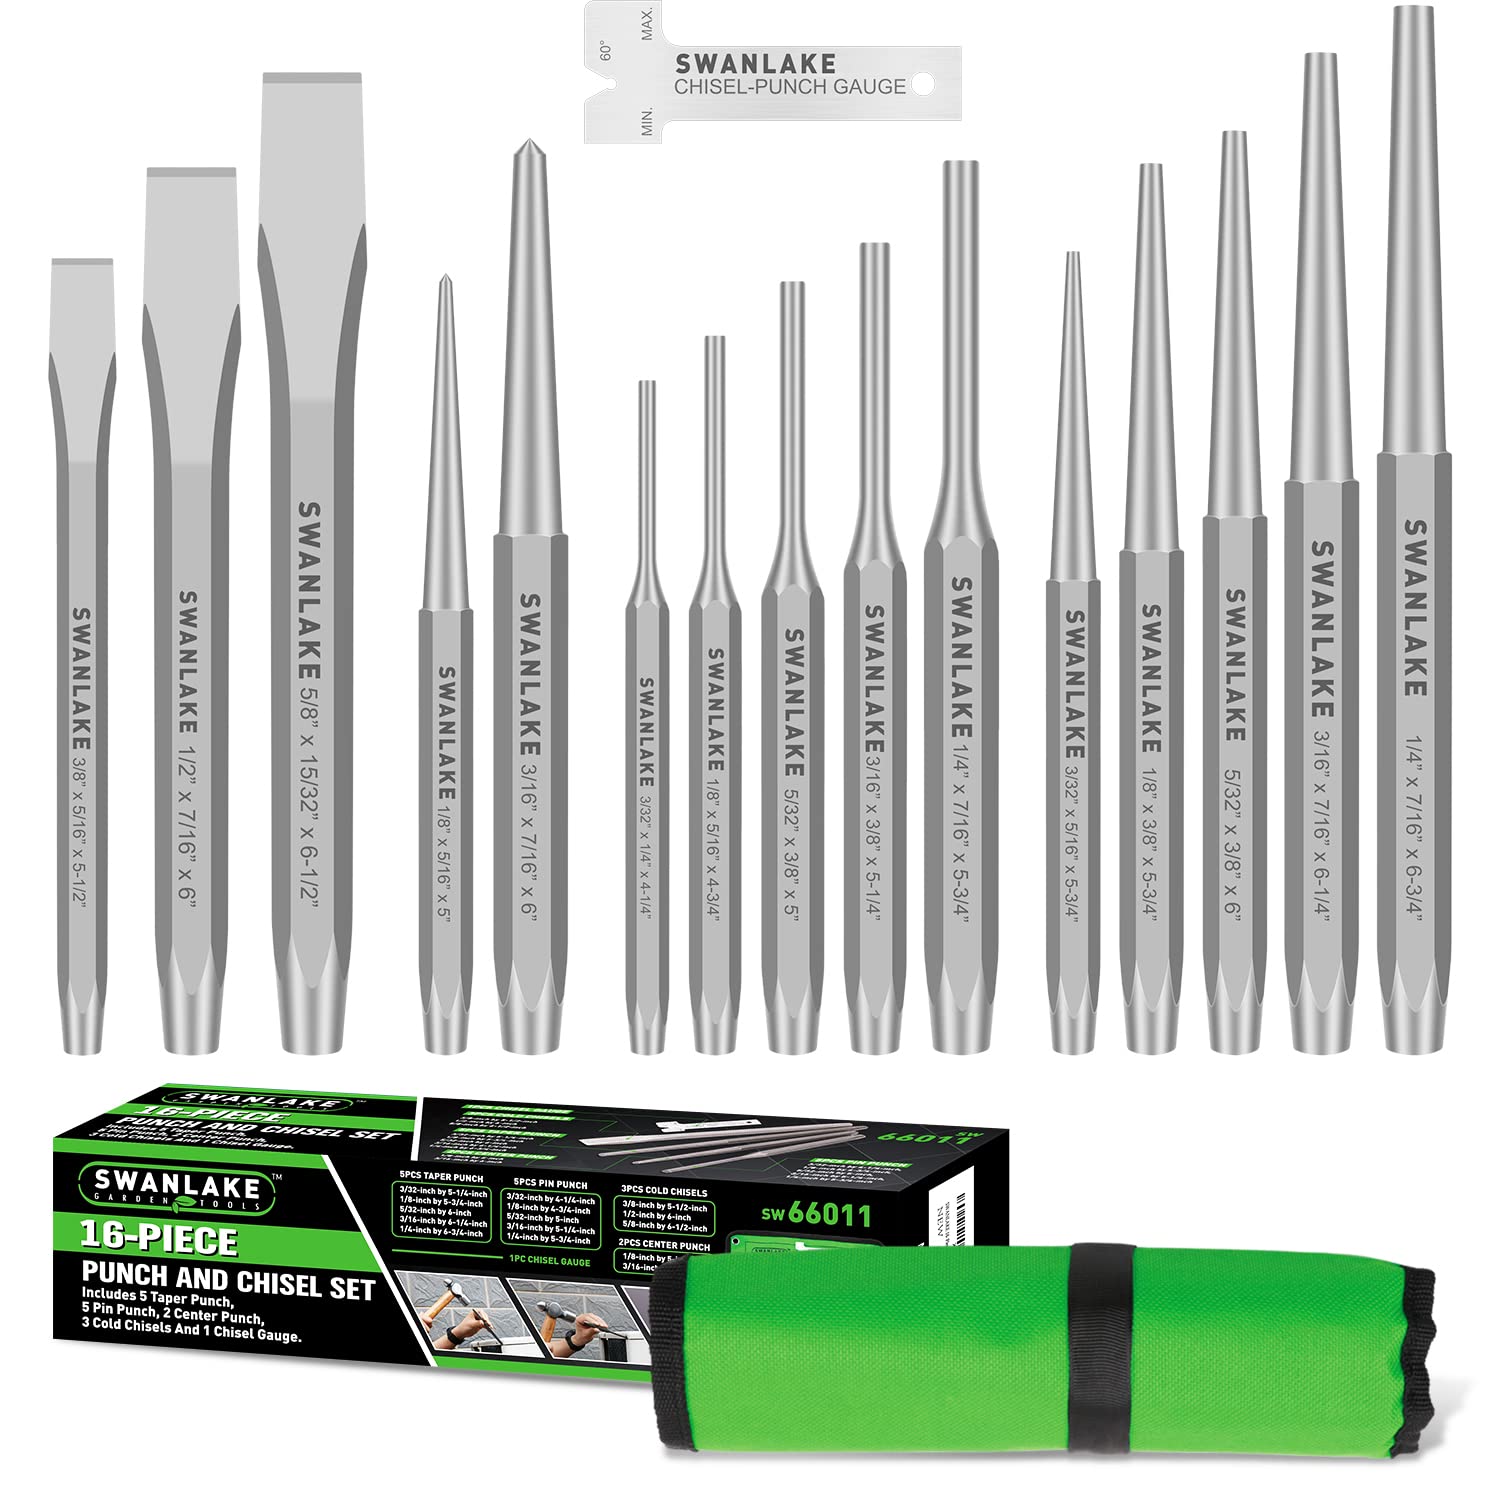 SWANLAKE Punch and Chisel Set, Including Taper Punch, Cold Chisels, Pin  Punch, Center Punch (16pcs)